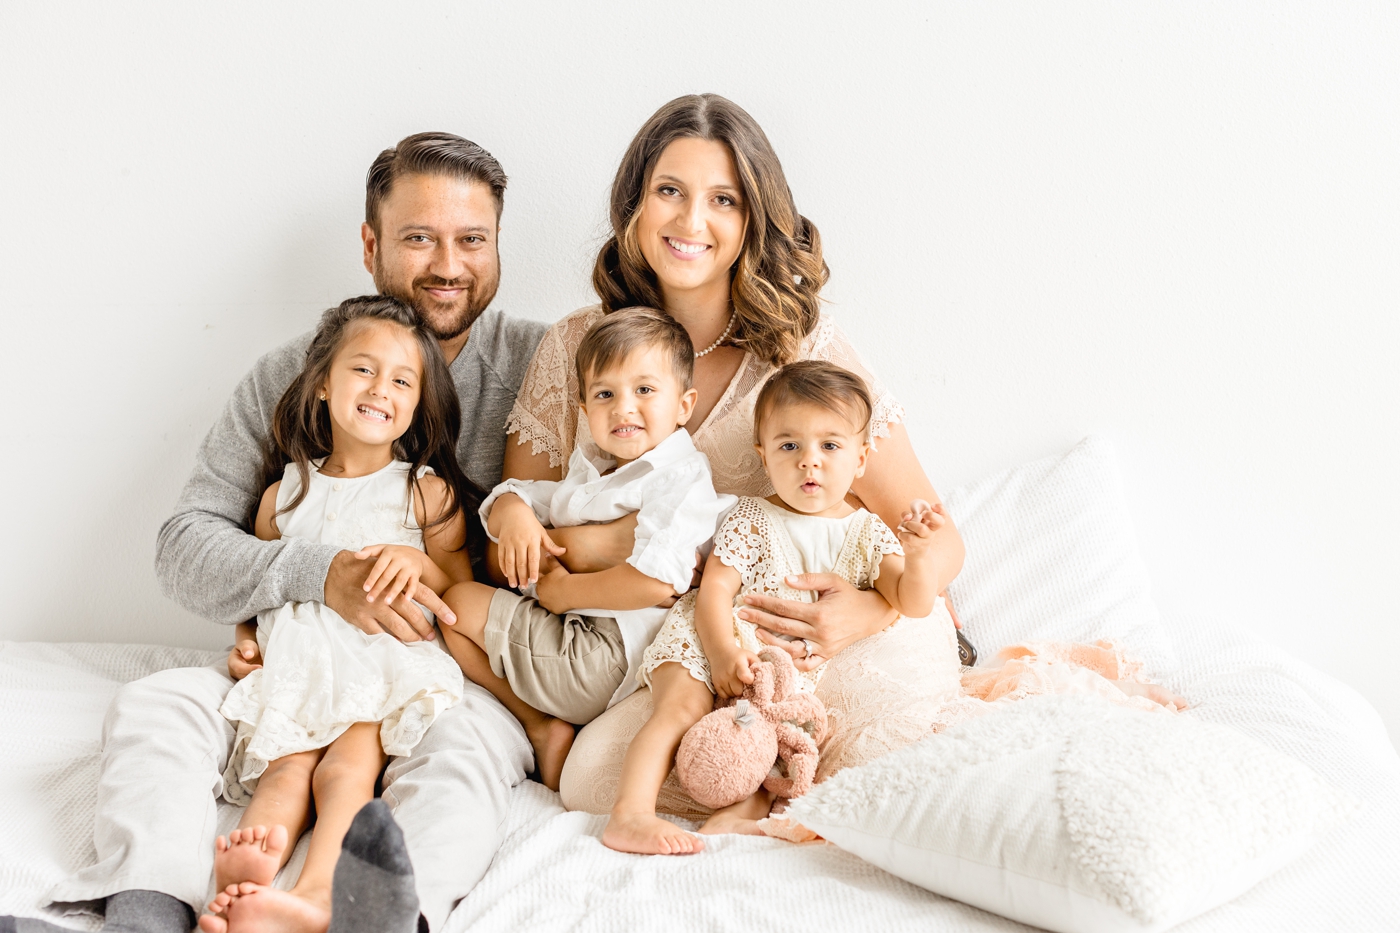 Portrait of family of five smiling at camera with full service family photographer, Sana Ahmed Photography.